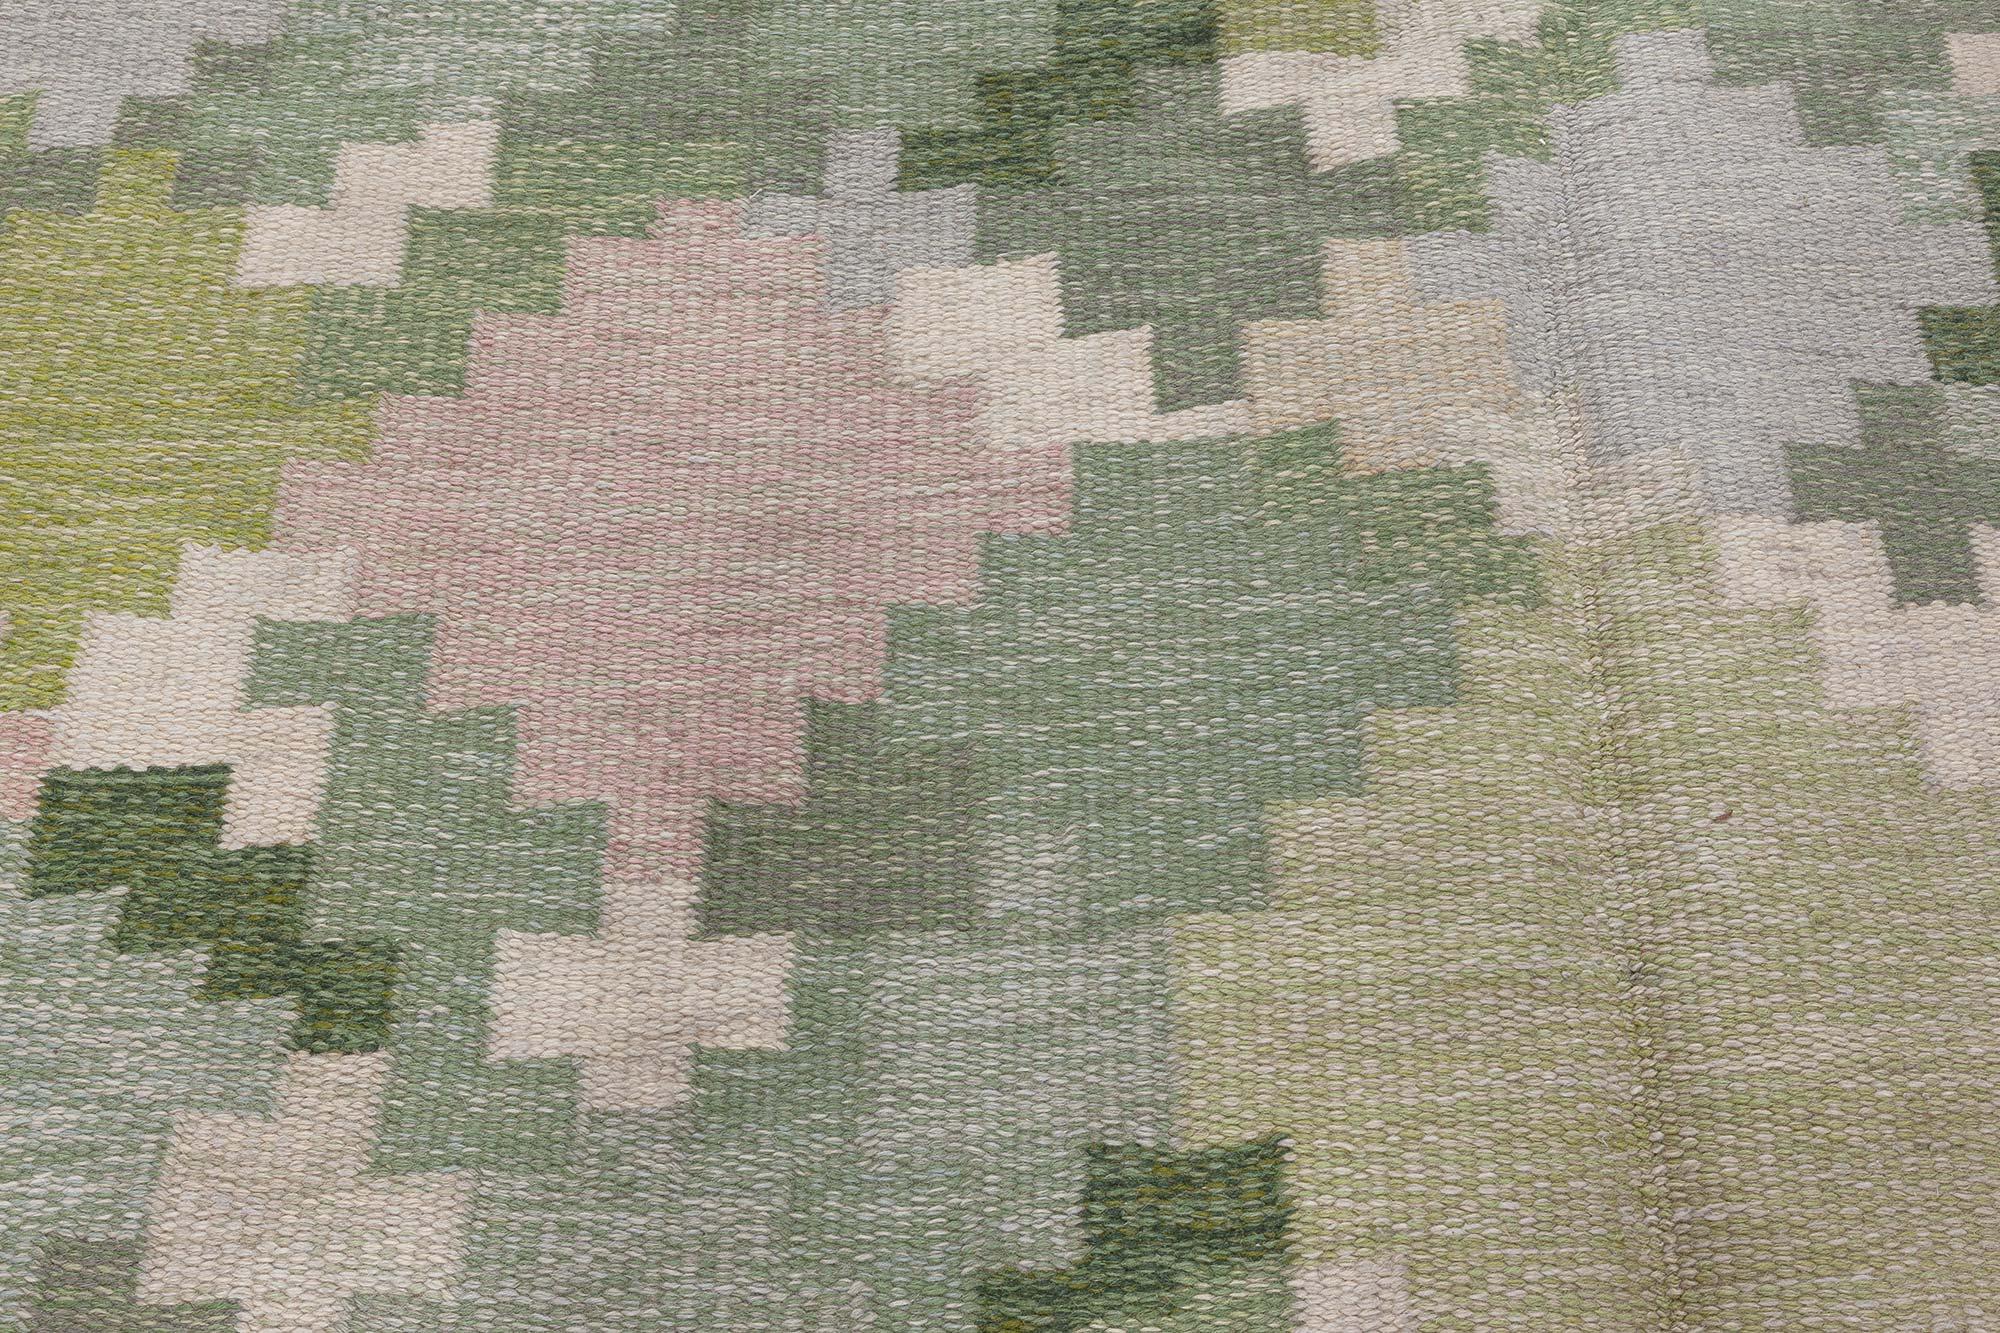 Mid-20th Century Swedish Pea Green Background Flat Weave Rug by Ingegerd Silow In Good Condition For Sale In New York, NY